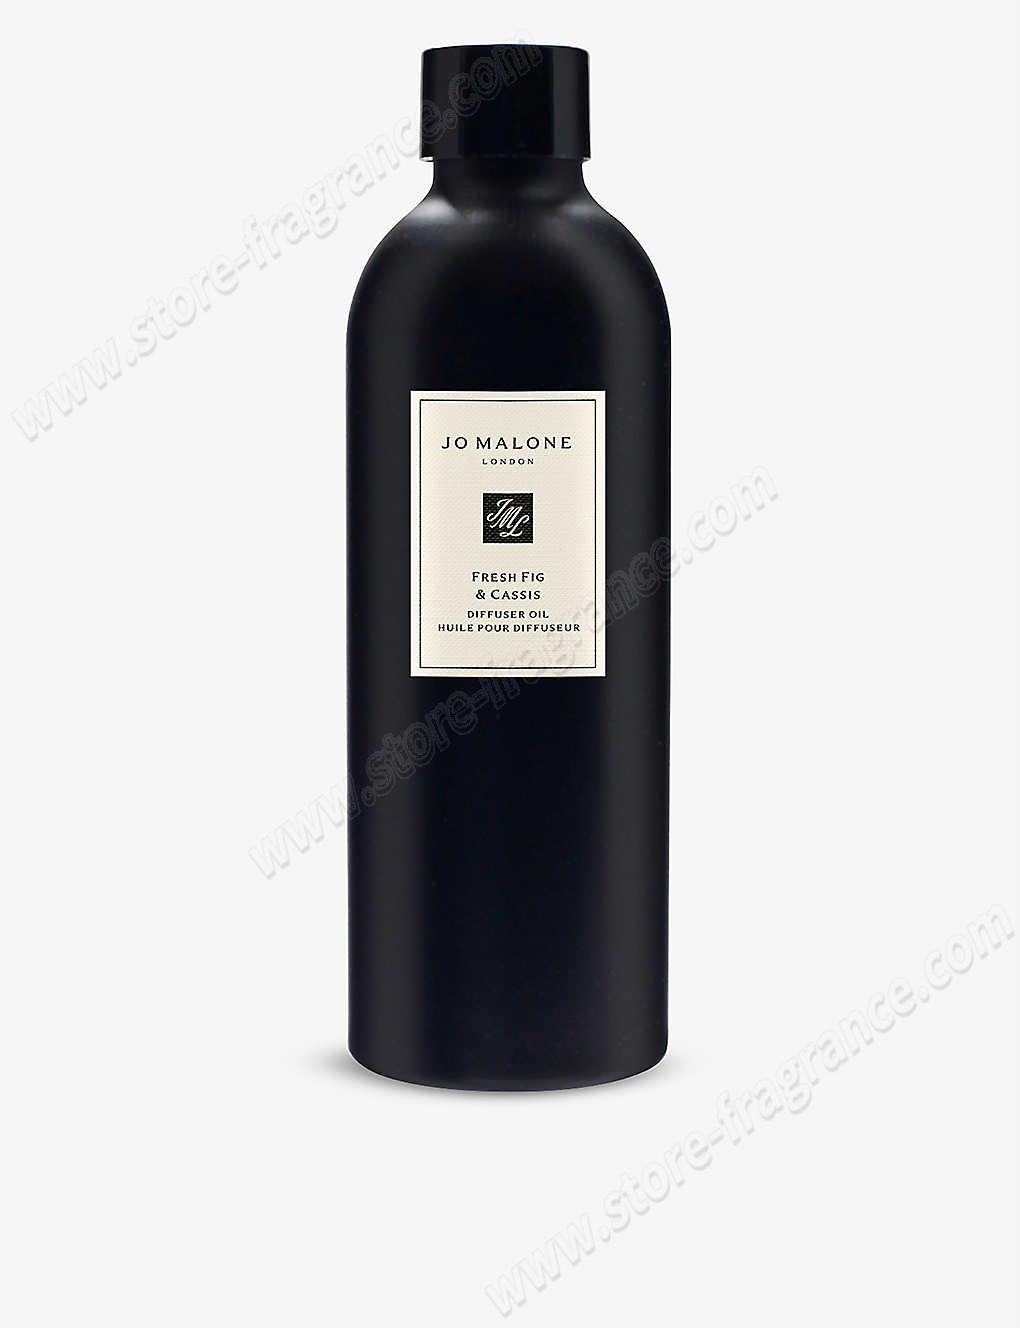 JO MALONE LONDON/Fresh Fig and Cassis diffuser refill 350ml ✿ Discount Store - JO MALONE LONDON/Fresh Fig and Cassis diffuser refill 350ml ✿ Discount Store